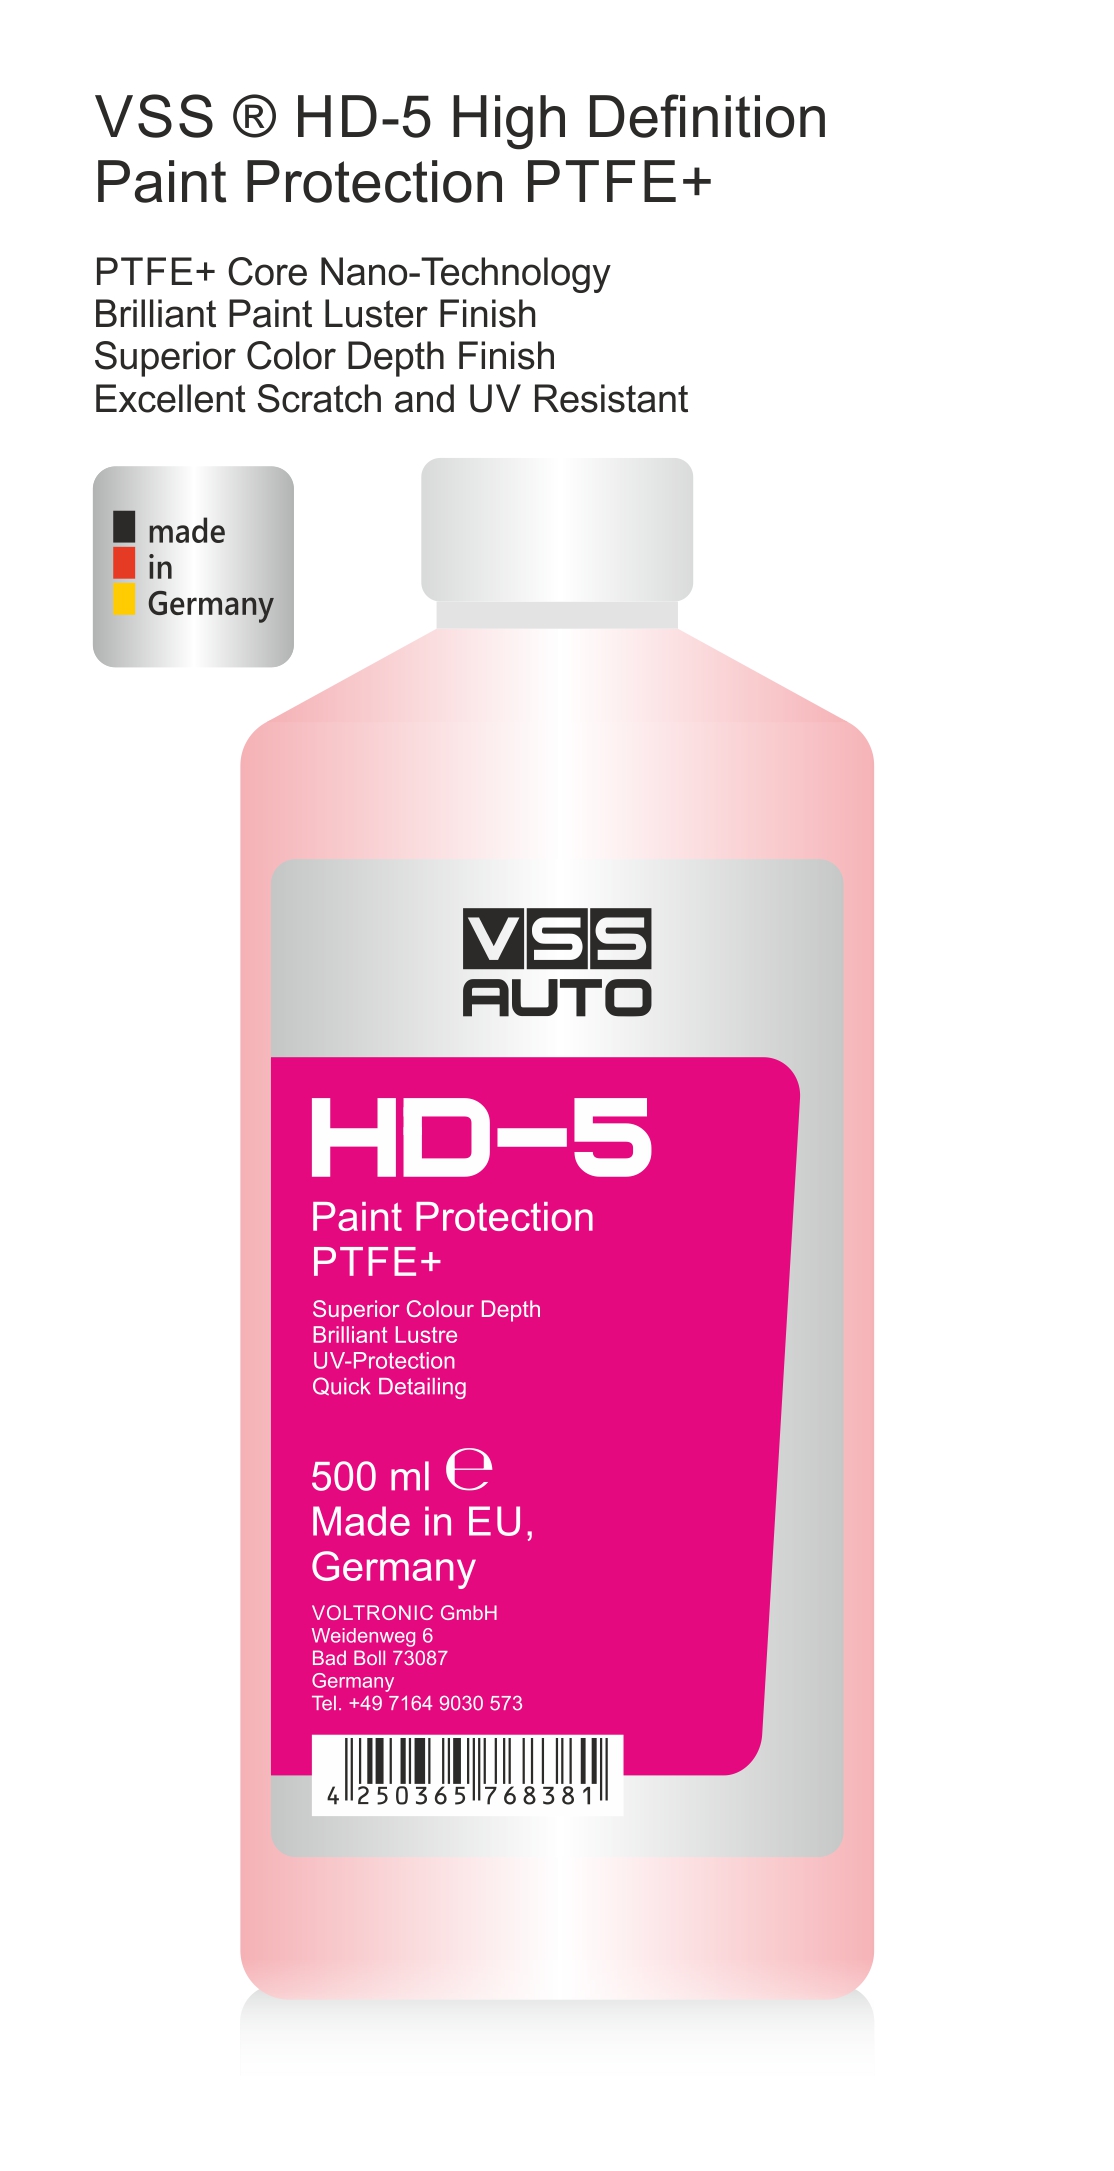 VSS HD-5 High Definition Paint Protection PTFE+